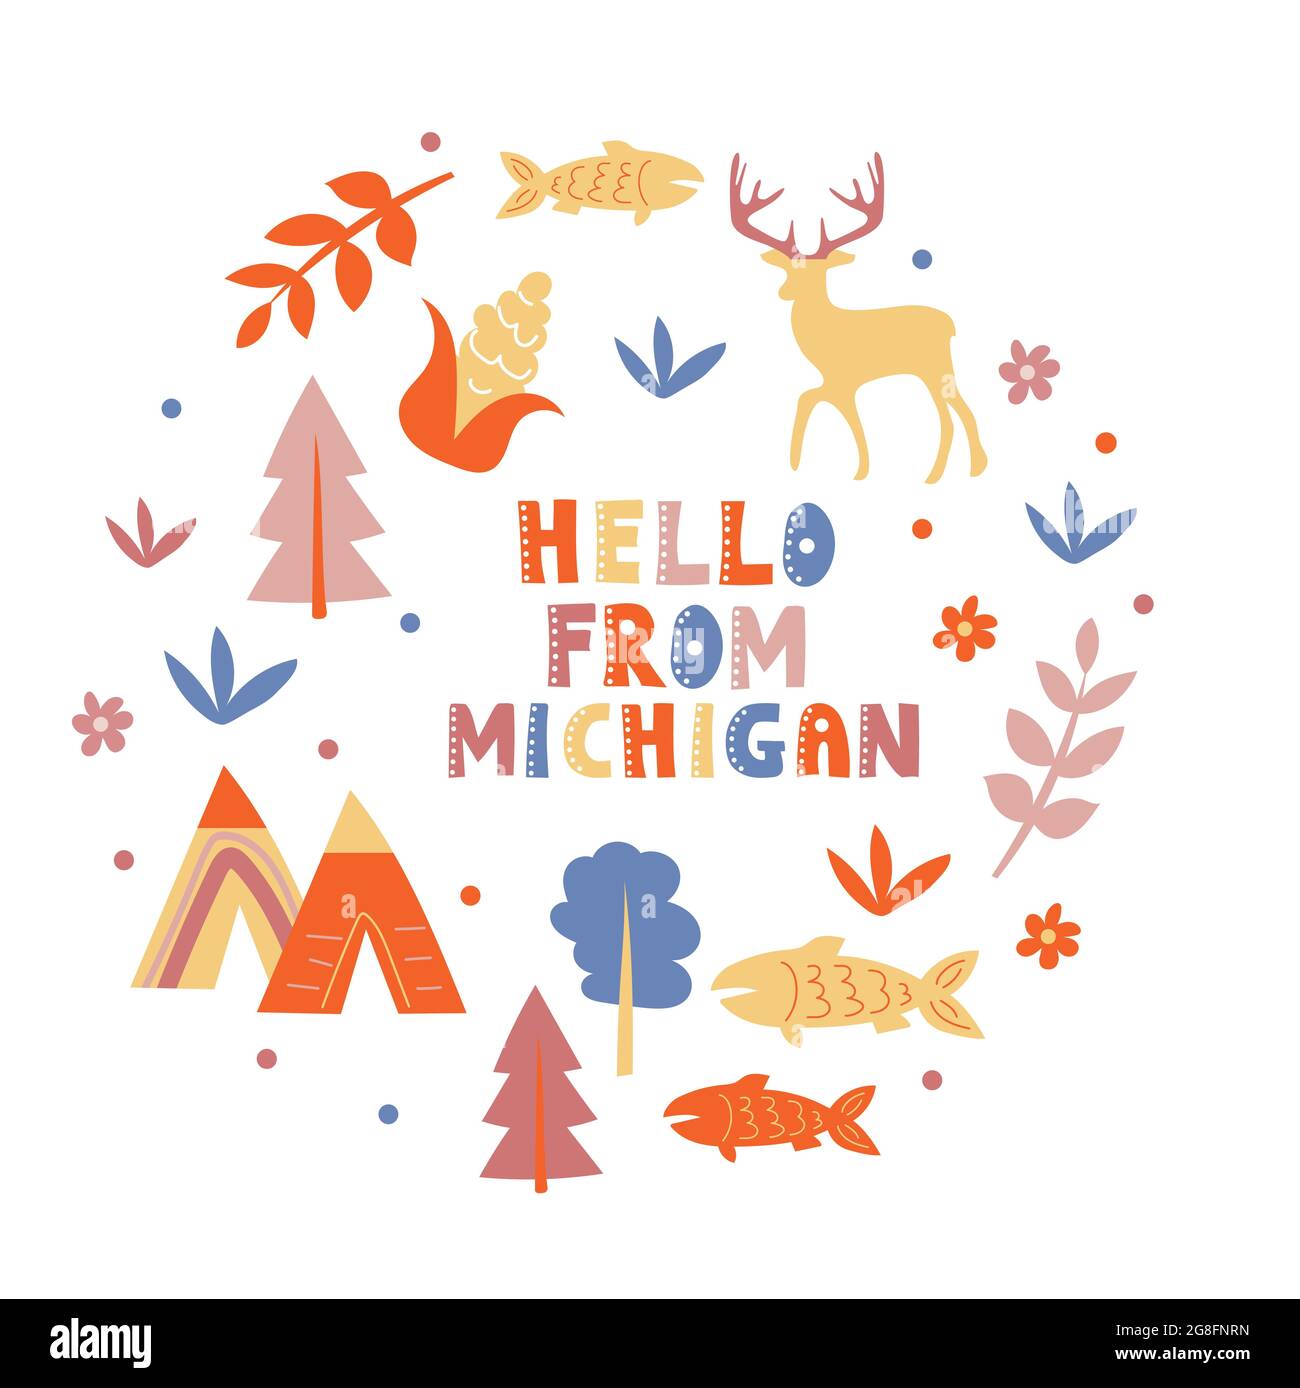 Illustrated map of the state of Michigan in United States with state symbols. Hello from - card. Editable vector illustration Stock Vector